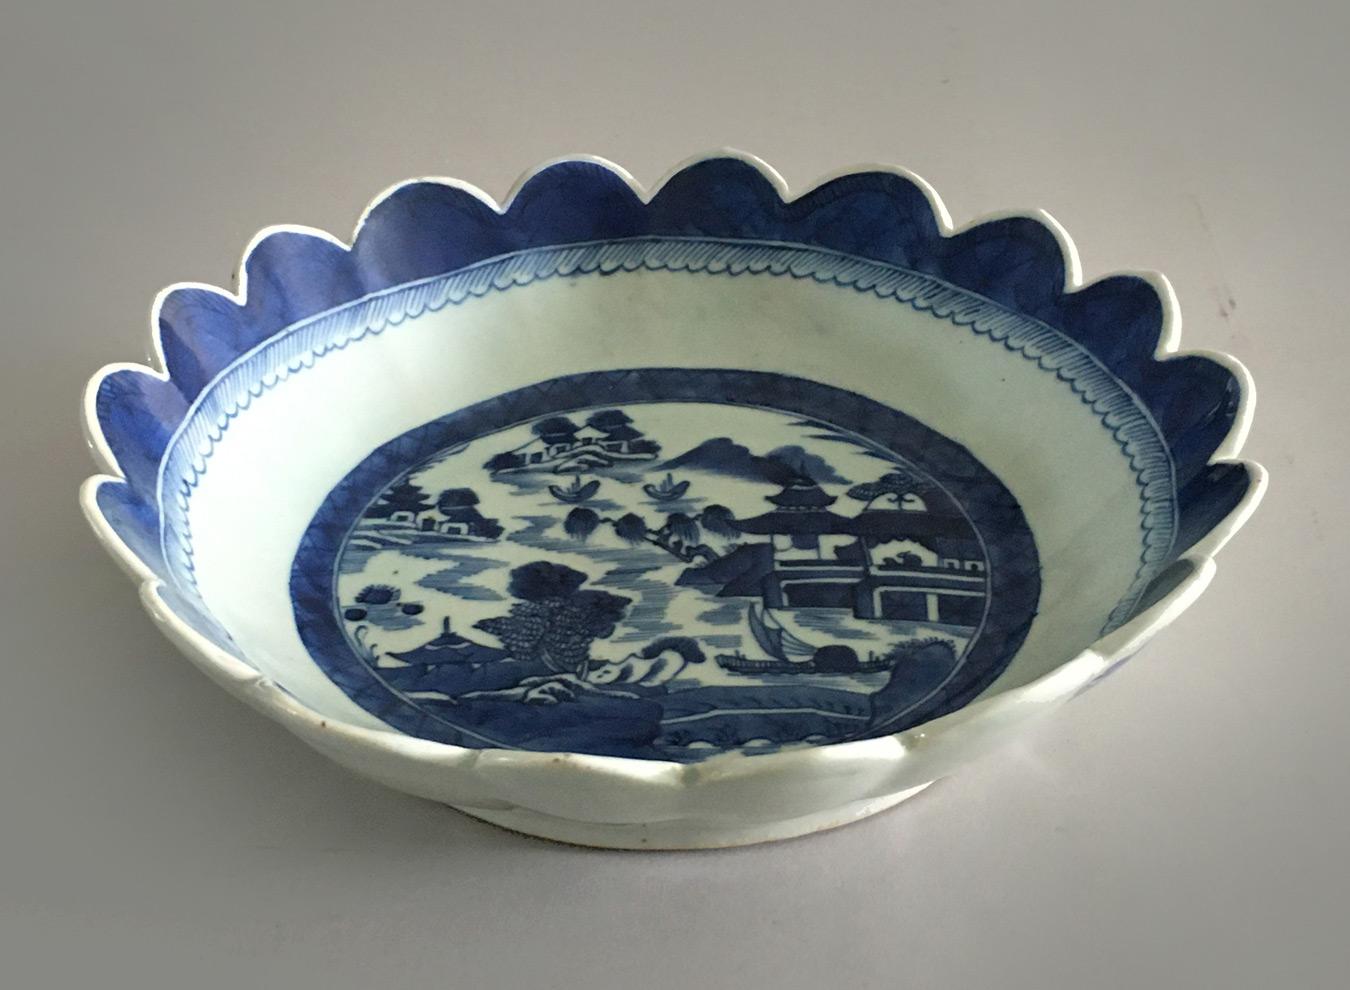 Chinese export Canton porcelain deep blue and white scalloped bowl. The inside is decorated with the traditional scene of pagodas, water, boats, rockery and trees. The outside surface is decorated with three sprigged flowers.